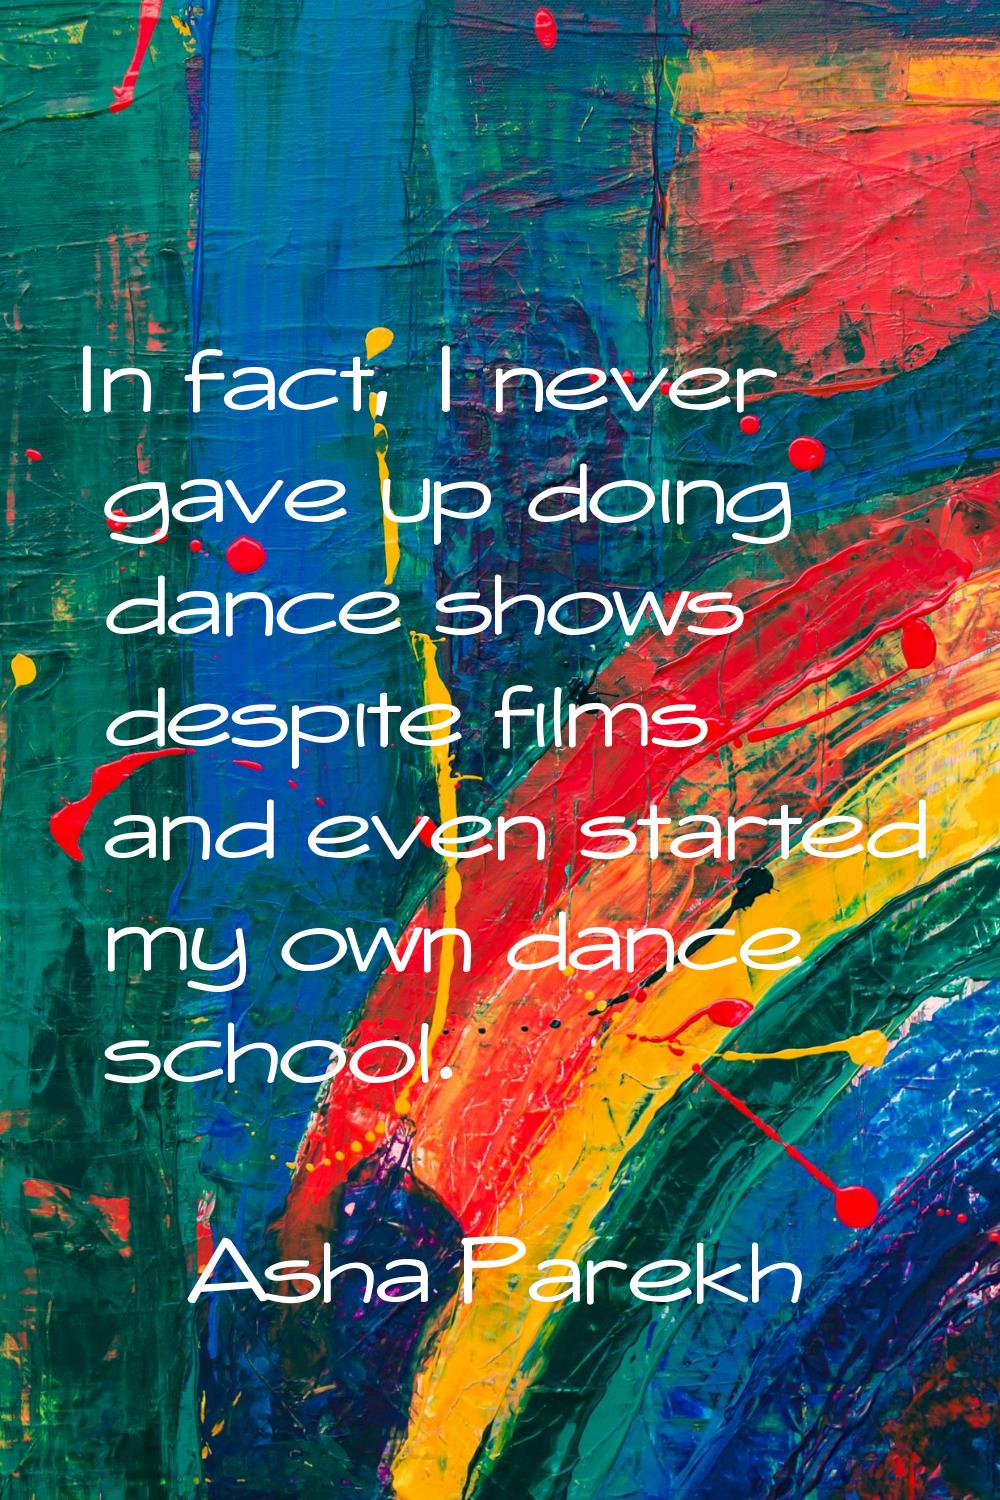 In fact, I never gave up doing dance shows despite films and even started my own dance school.